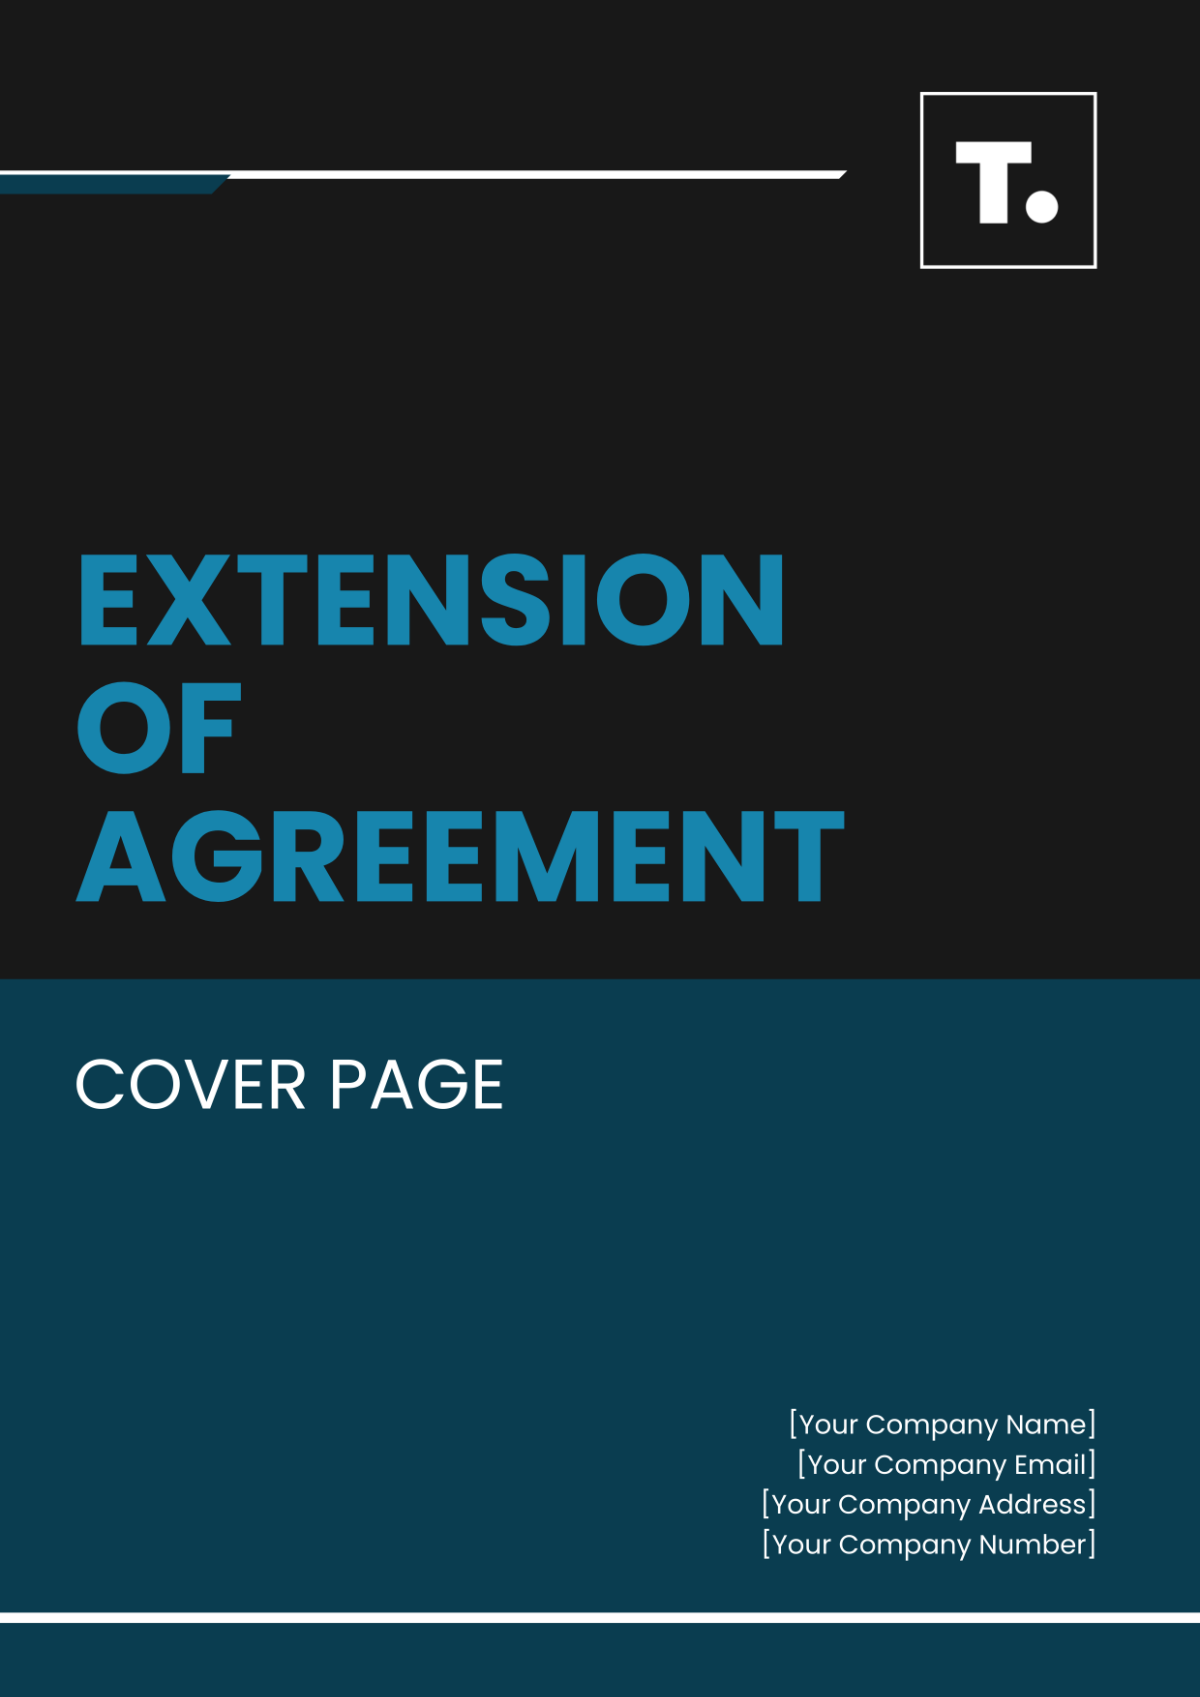 Extension of Agreement